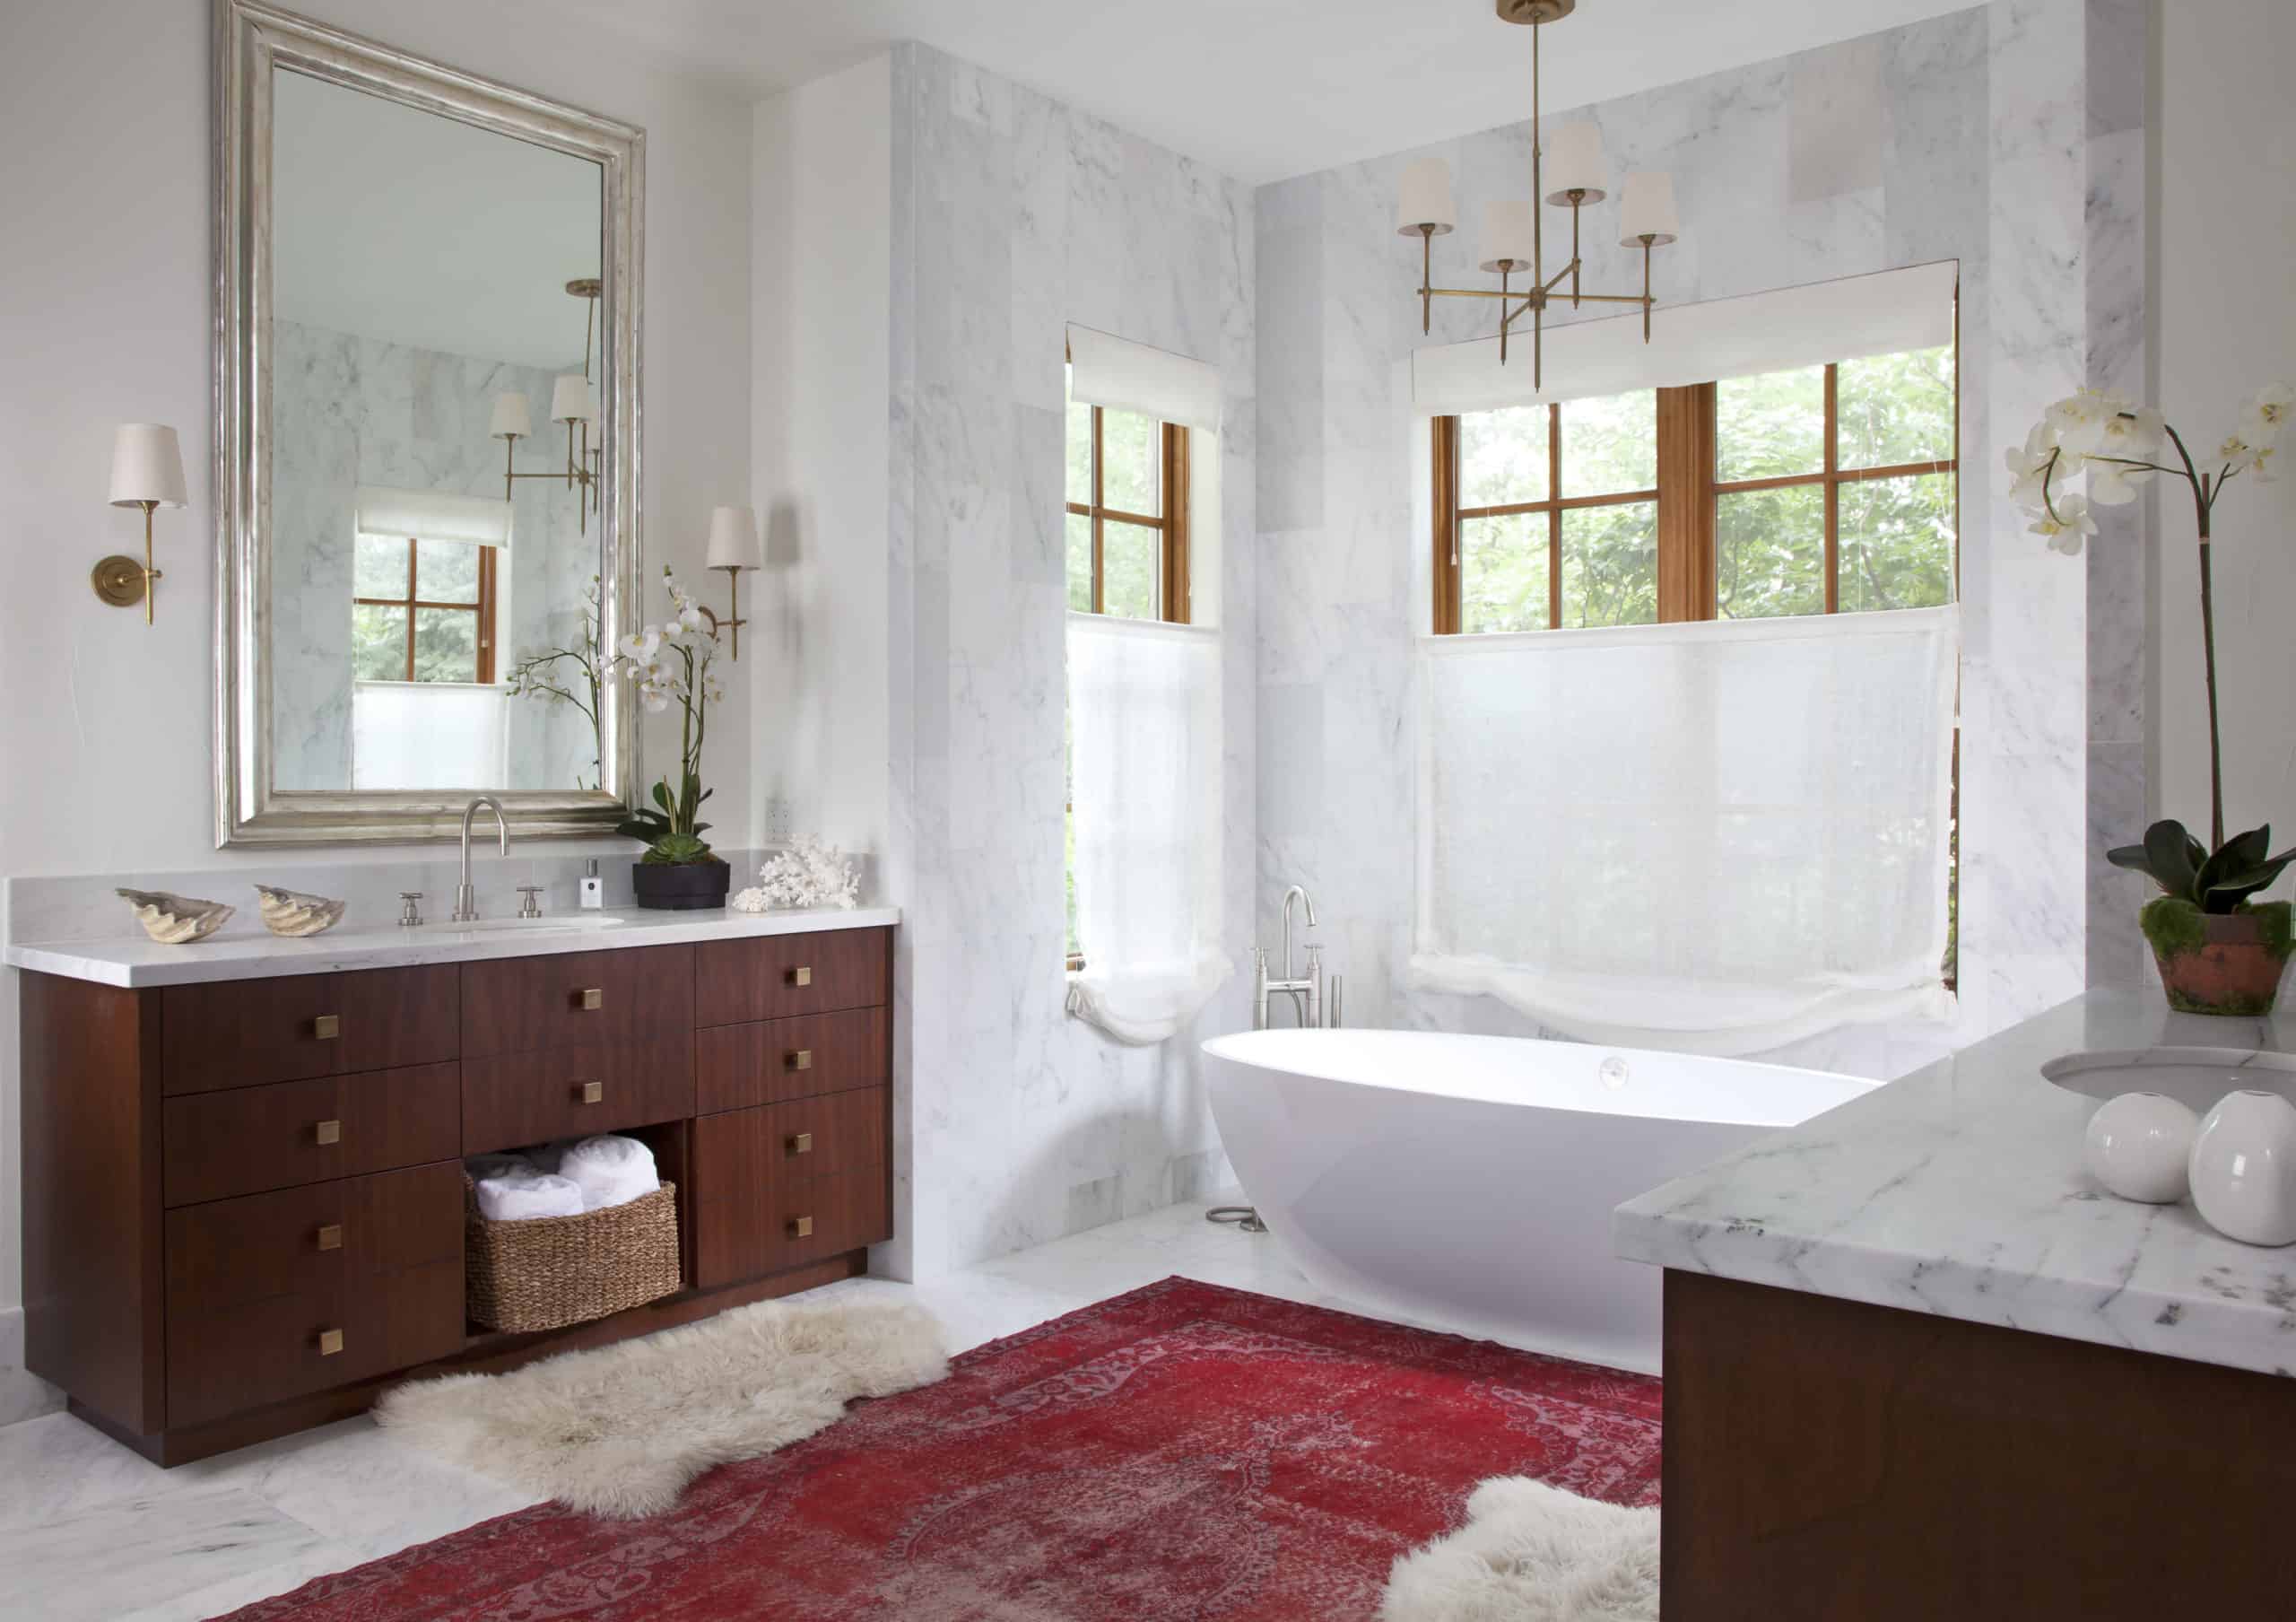 Luxury Bathroom Renovation with Two Vanities and Red Accent Rug